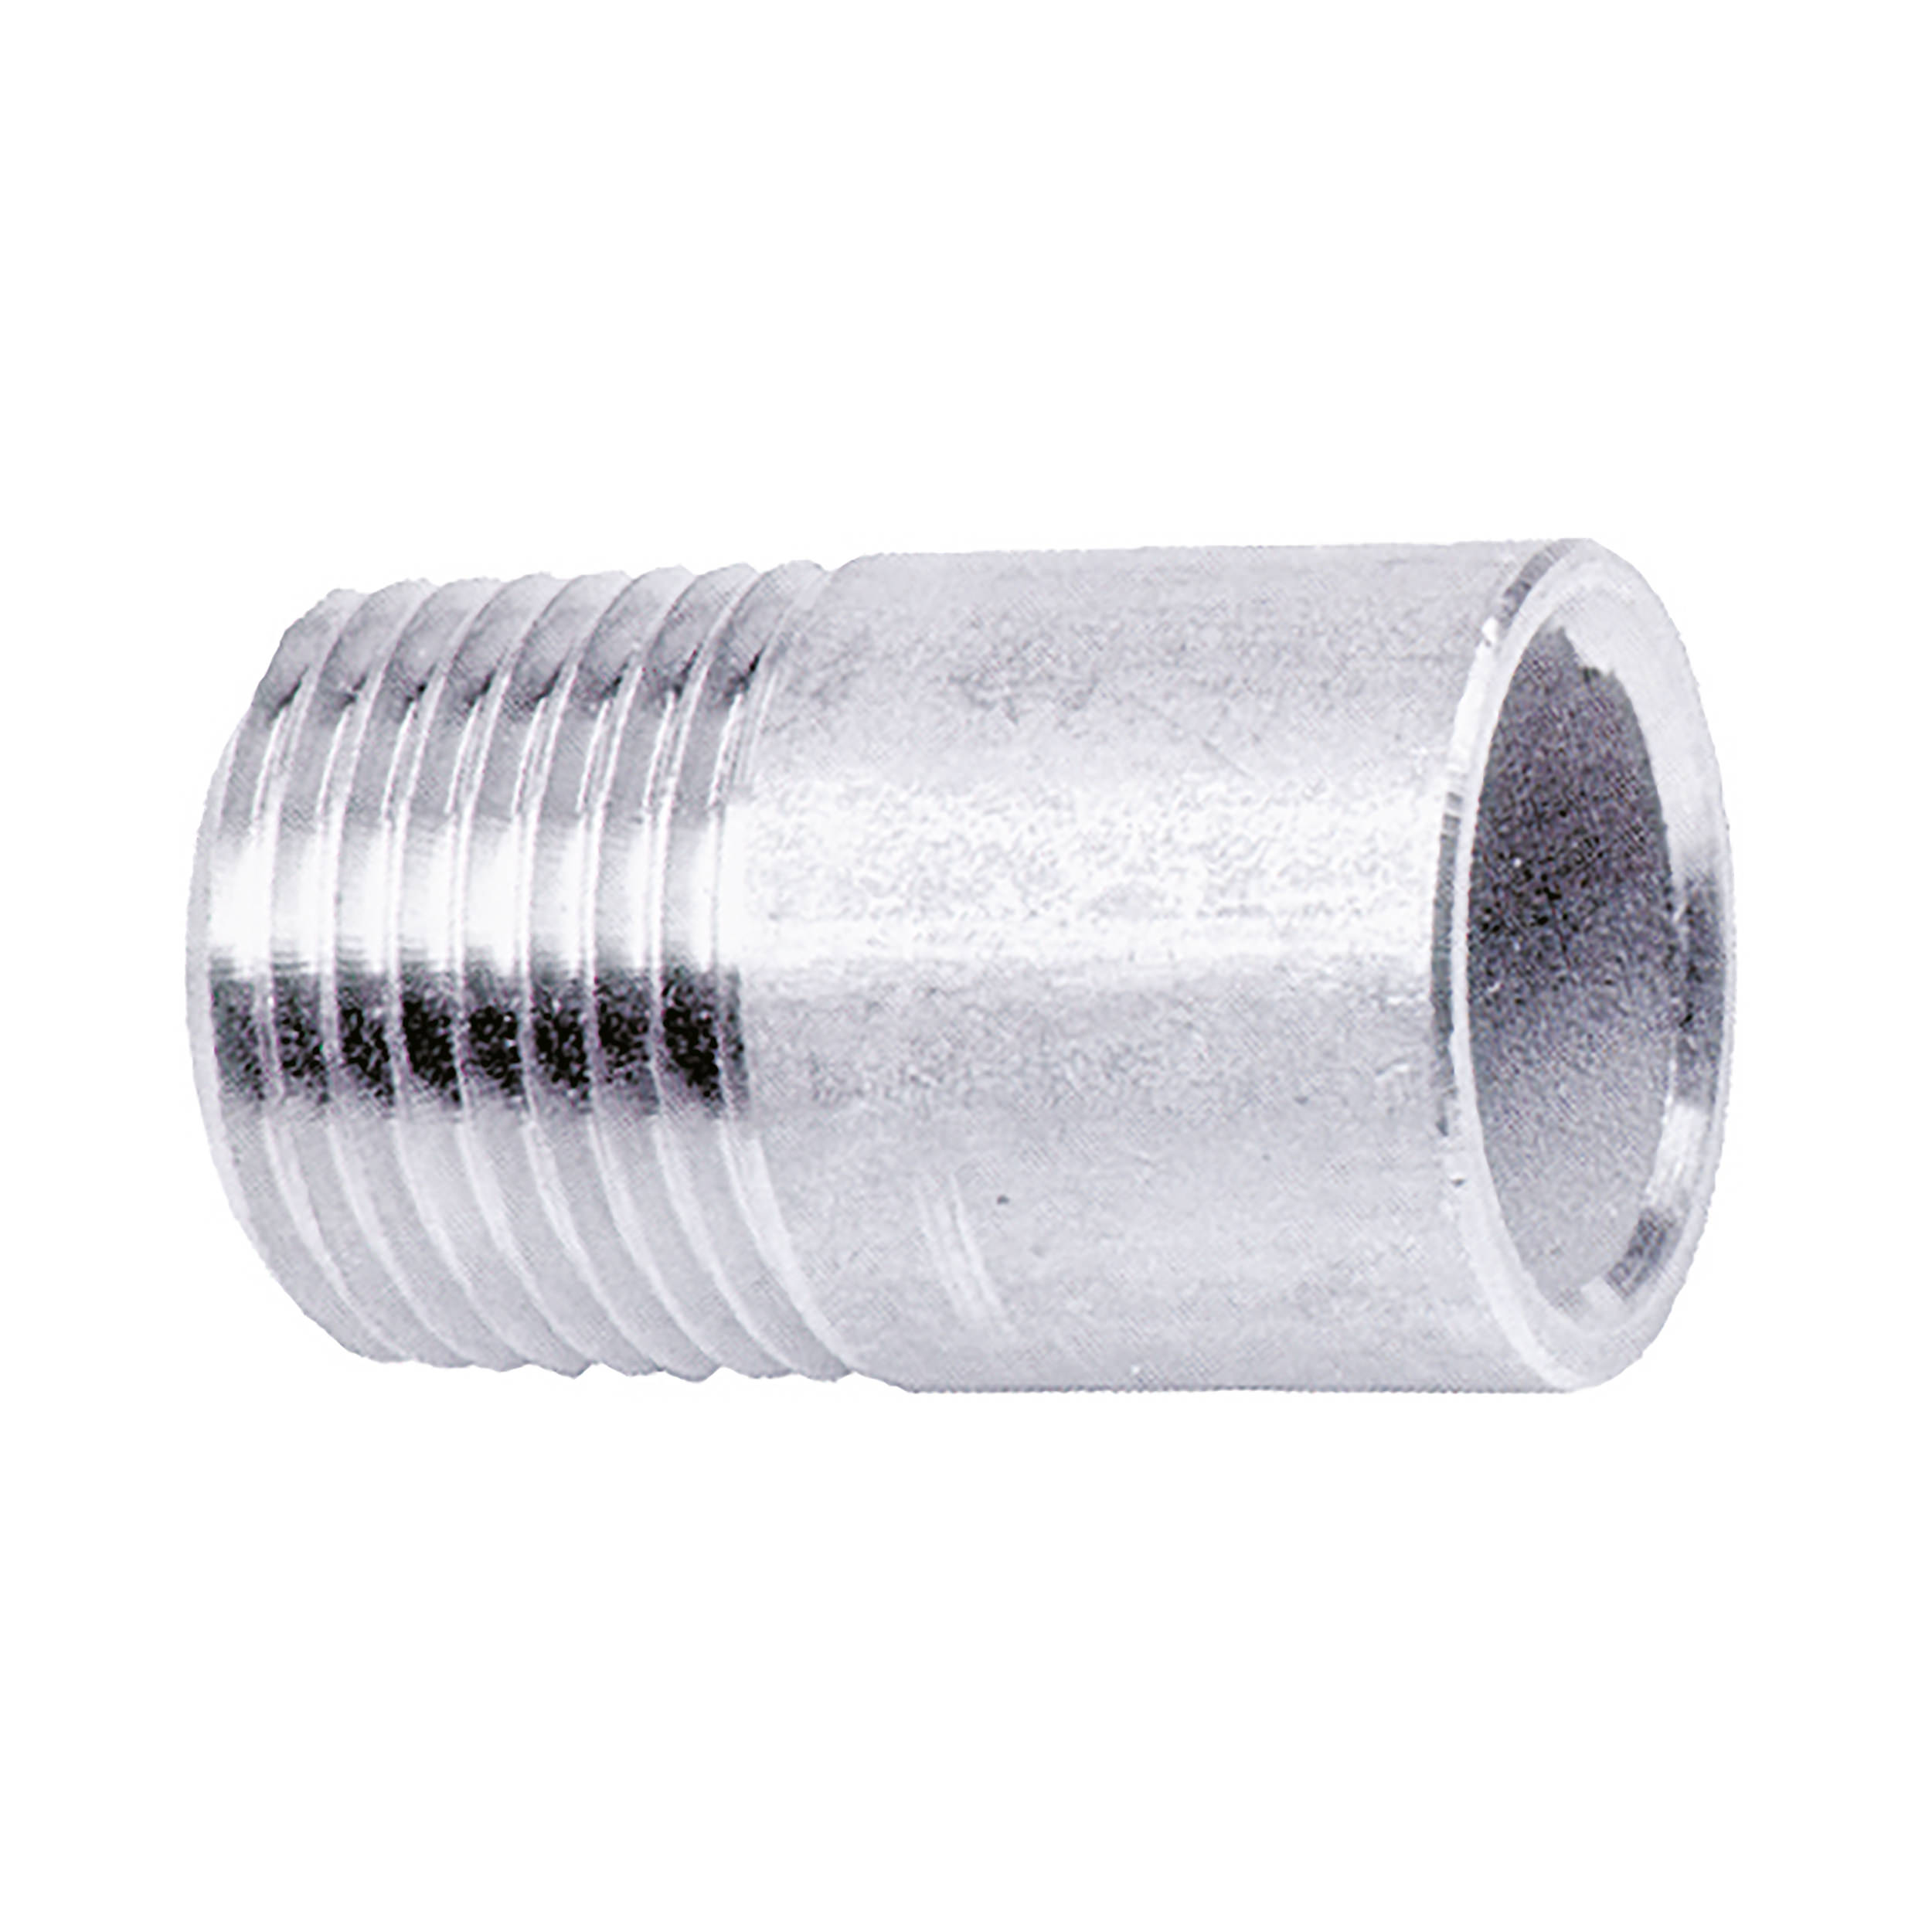 Welding plug made of tube, stainless steel, male thread